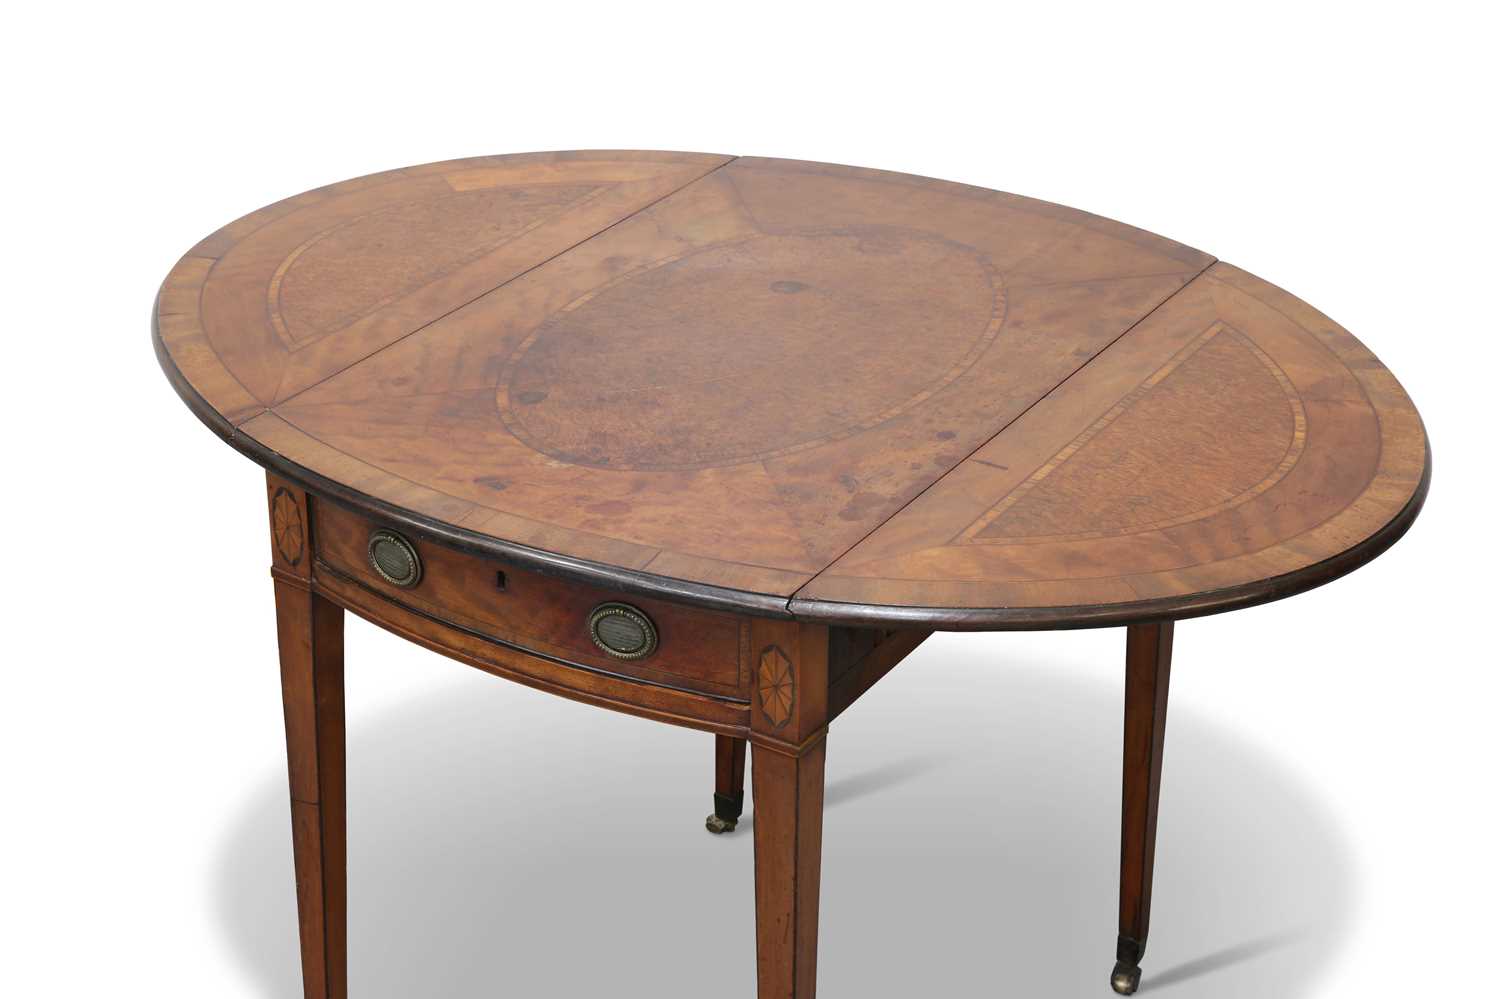 A GEORGE III SATINWOOD, BURR YEW AND PURPLEHEART PEMBROKE TABLE, CIRCA 1790 - Image 2 of 11